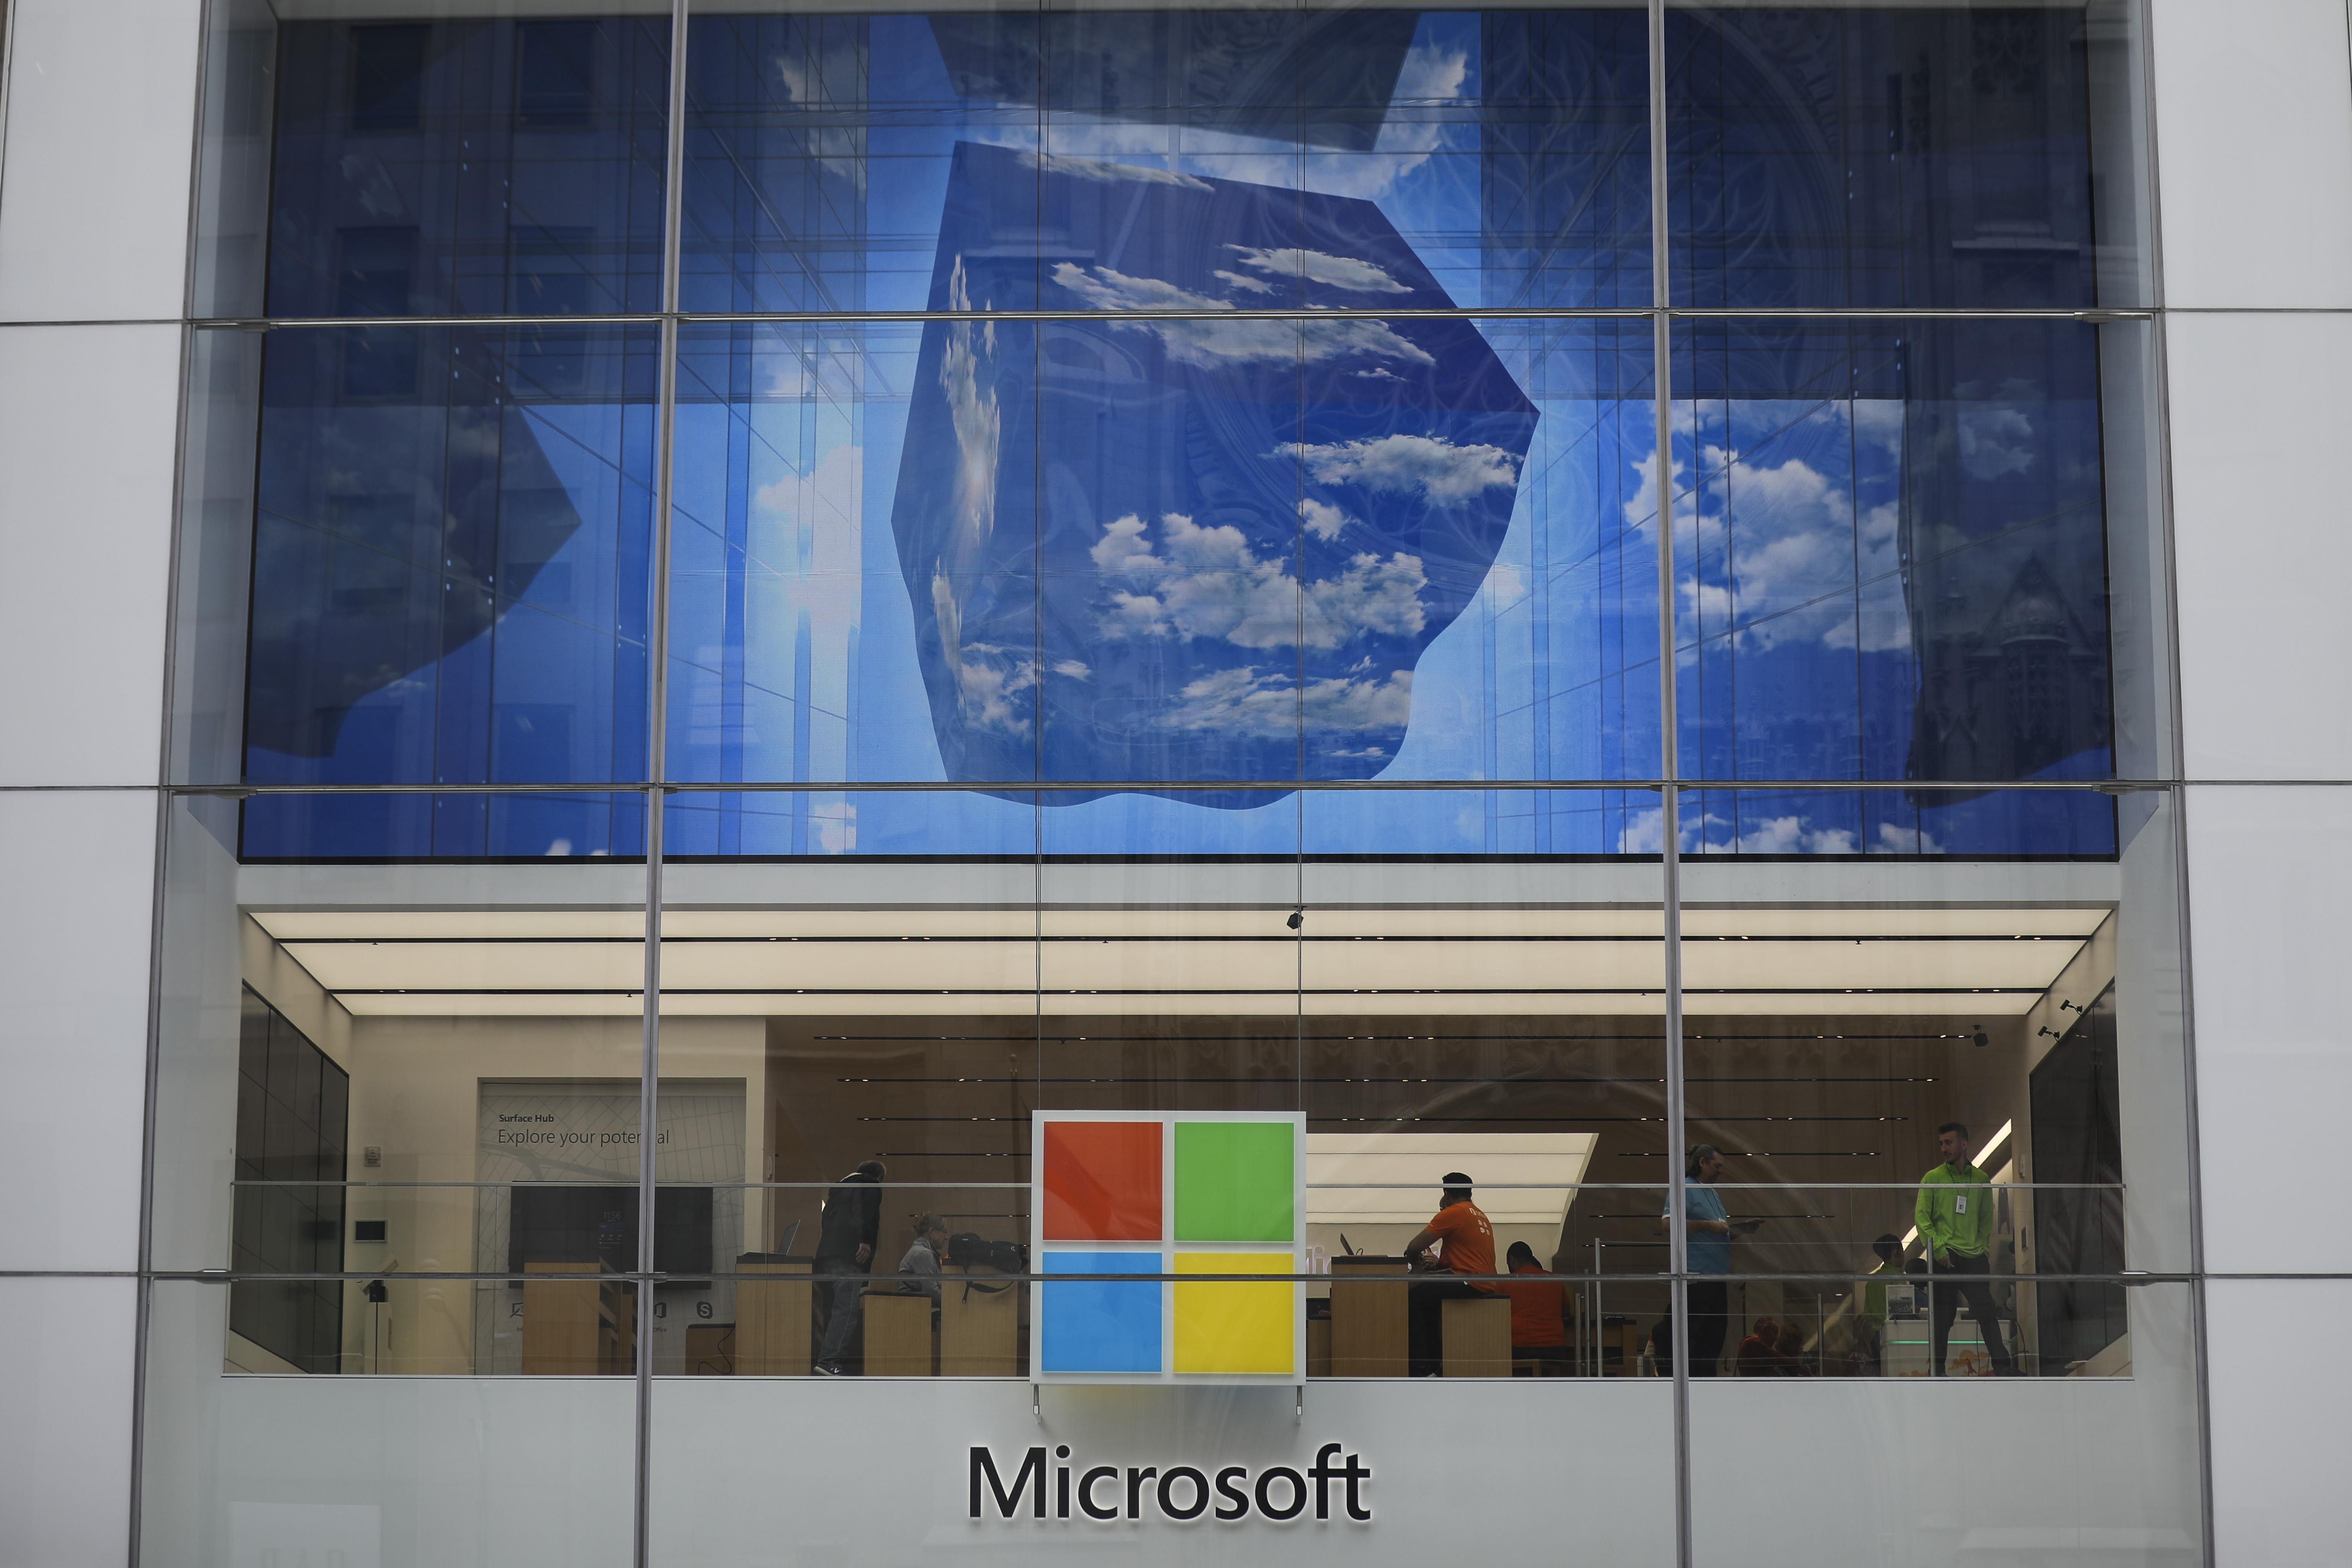 NEW YORK, NY - JUNE 4: The  Microsoft store on Fifth Avenue in Midtown Manhattan is shown June 4, 2018 in New York City. Microsoft officially announced today an agreement to buy GitHub, a code repository company popular with software developers, for $7.5 billion in stock. (Photo by Drew Angerer/Getty Images)